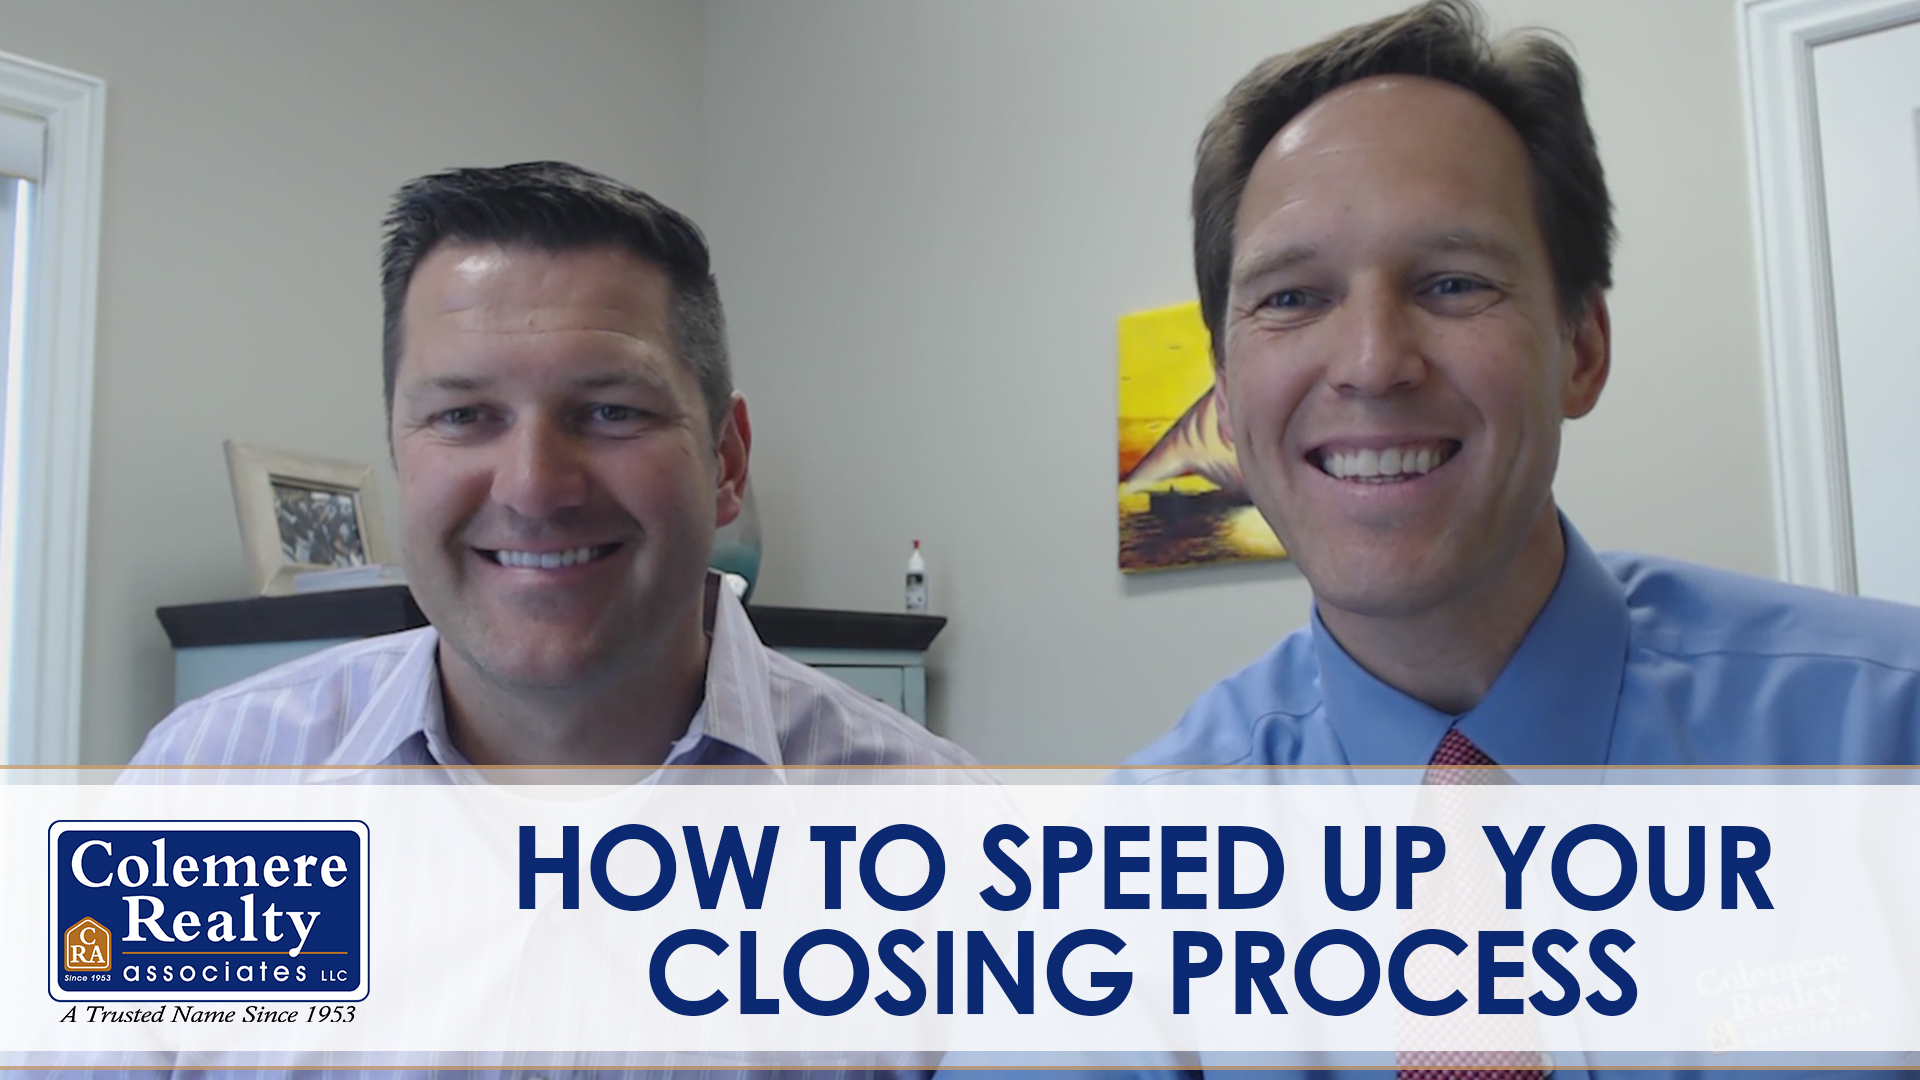 How Can You Ensure a Quick Closing?